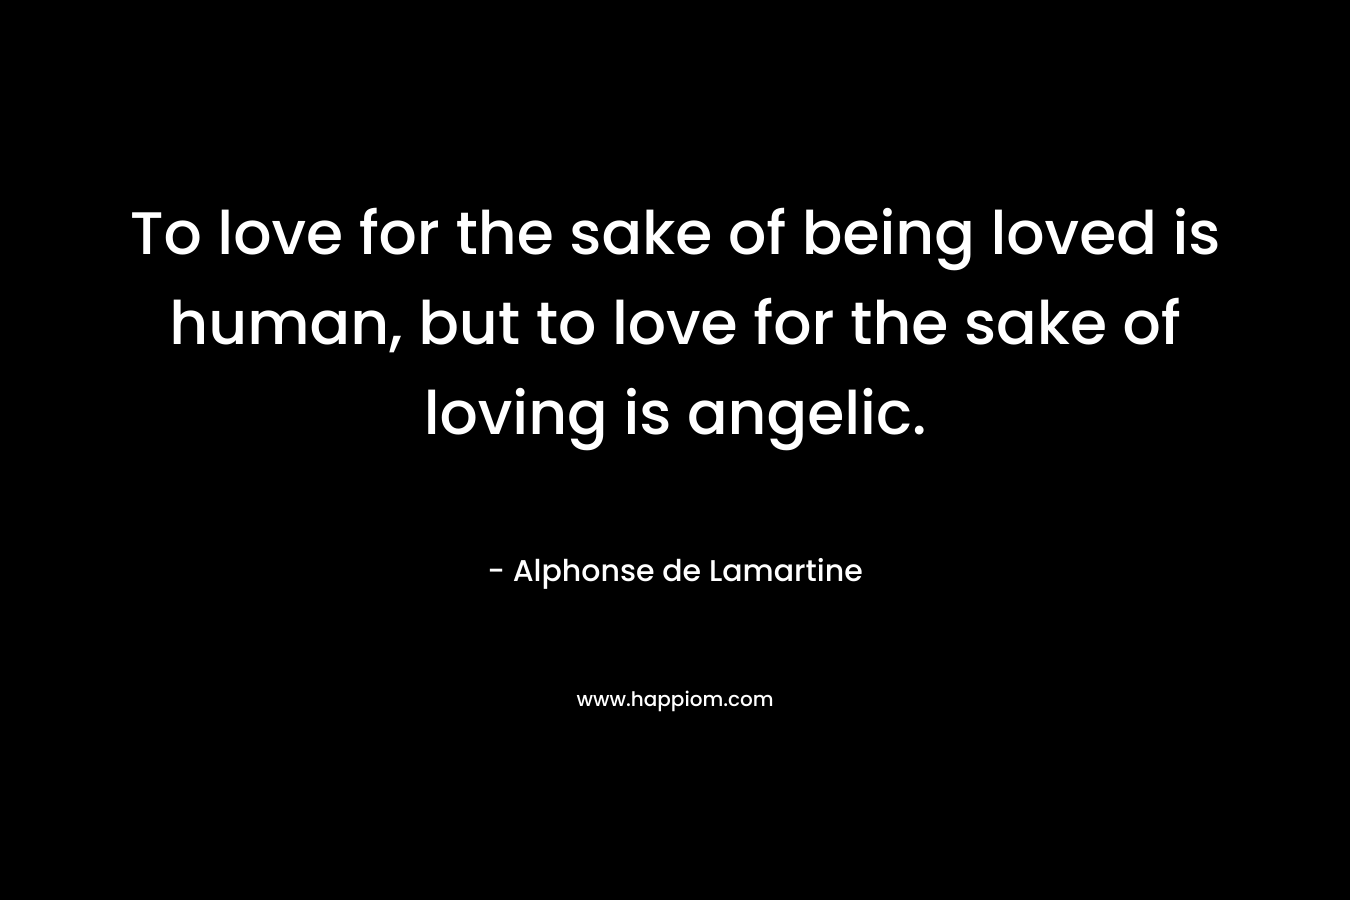 To love for the sake of being loved is human, but to love for the sake of loving is angelic. – Alphonse de Lamartine